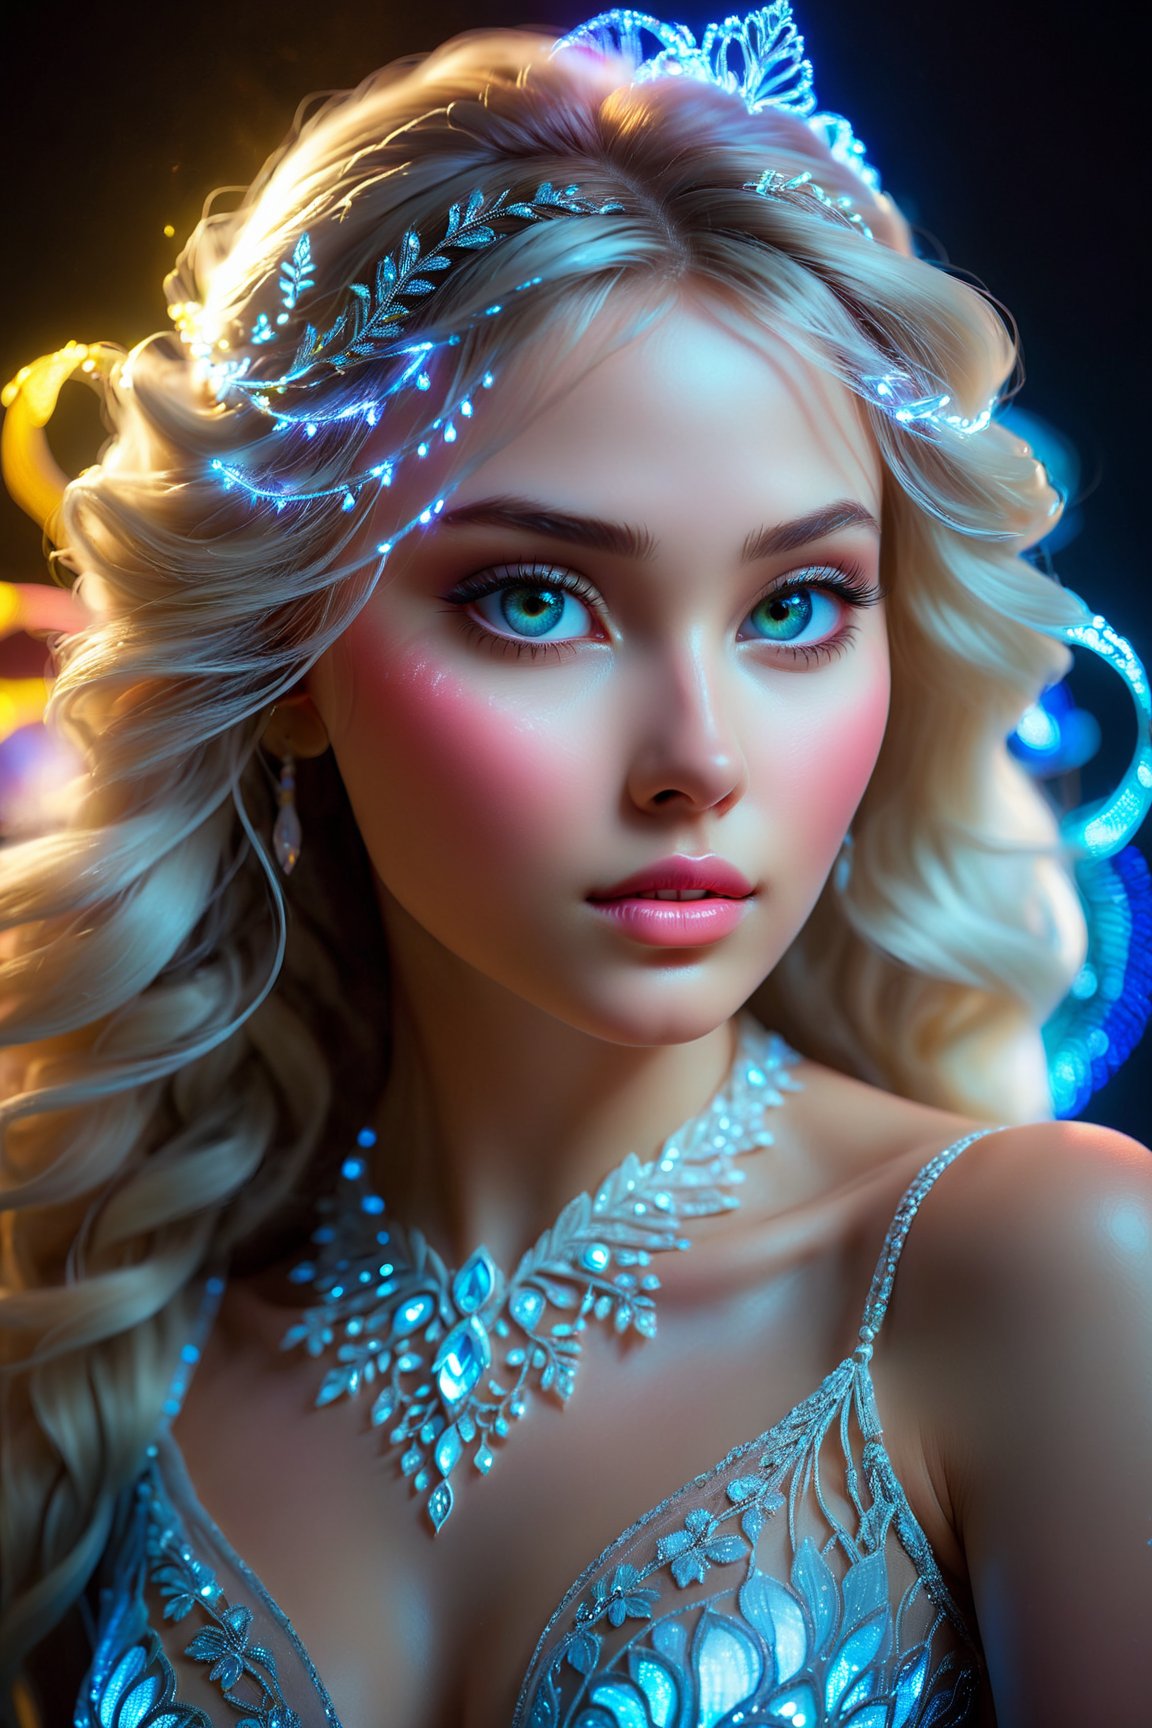 (high quality, 4k, 8k, highres, masterpiece:1.2), ultra-detailed, realistic, beautiful detailed eyes, beautiful detailed lips, extremely detailed eyes and face, longeyelashes, fantastic magical portrait, breathtaking glowing silhouette of a woman, ethereal and dreamlike figure, dressed in flowing delicate garments, gentle gaze piercing through the darkness, mysterious aura surrounding her, translucent skin emitting a soft radiance, translucent body like an ethereal apparition, curved lines and graceful movements, neon lights illuminating her delicate features, glimmering light particles floating around her, creating a surreal and otherworldly atmosphere, vibrant and vivid colors, painted with mesmerizing cmyk colors, adding depth and dimension to the portrait, backlit by a mesmerizing glow, casting a beautiful and enchanting aura around her, masterfully captured moment frozen in time, amazing fusion of the real and the surreal, creating a captivating and immersive visual experience.